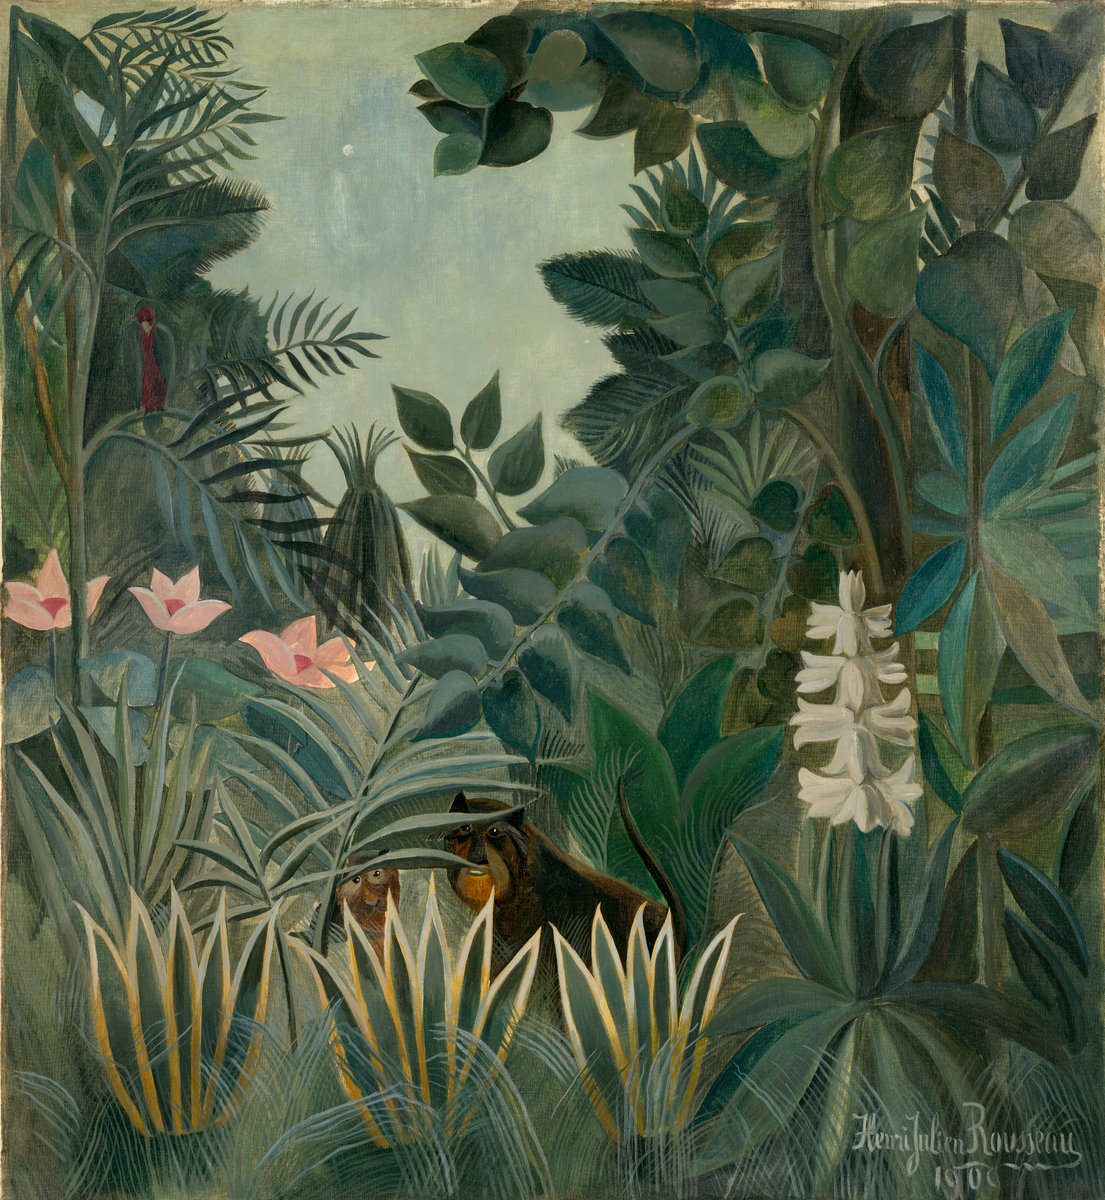 Fig. 17 – The Equatorial Jungle, Henri Rousseau, 1909. National Gallery of Art, Washington. Chester Dale Collection.